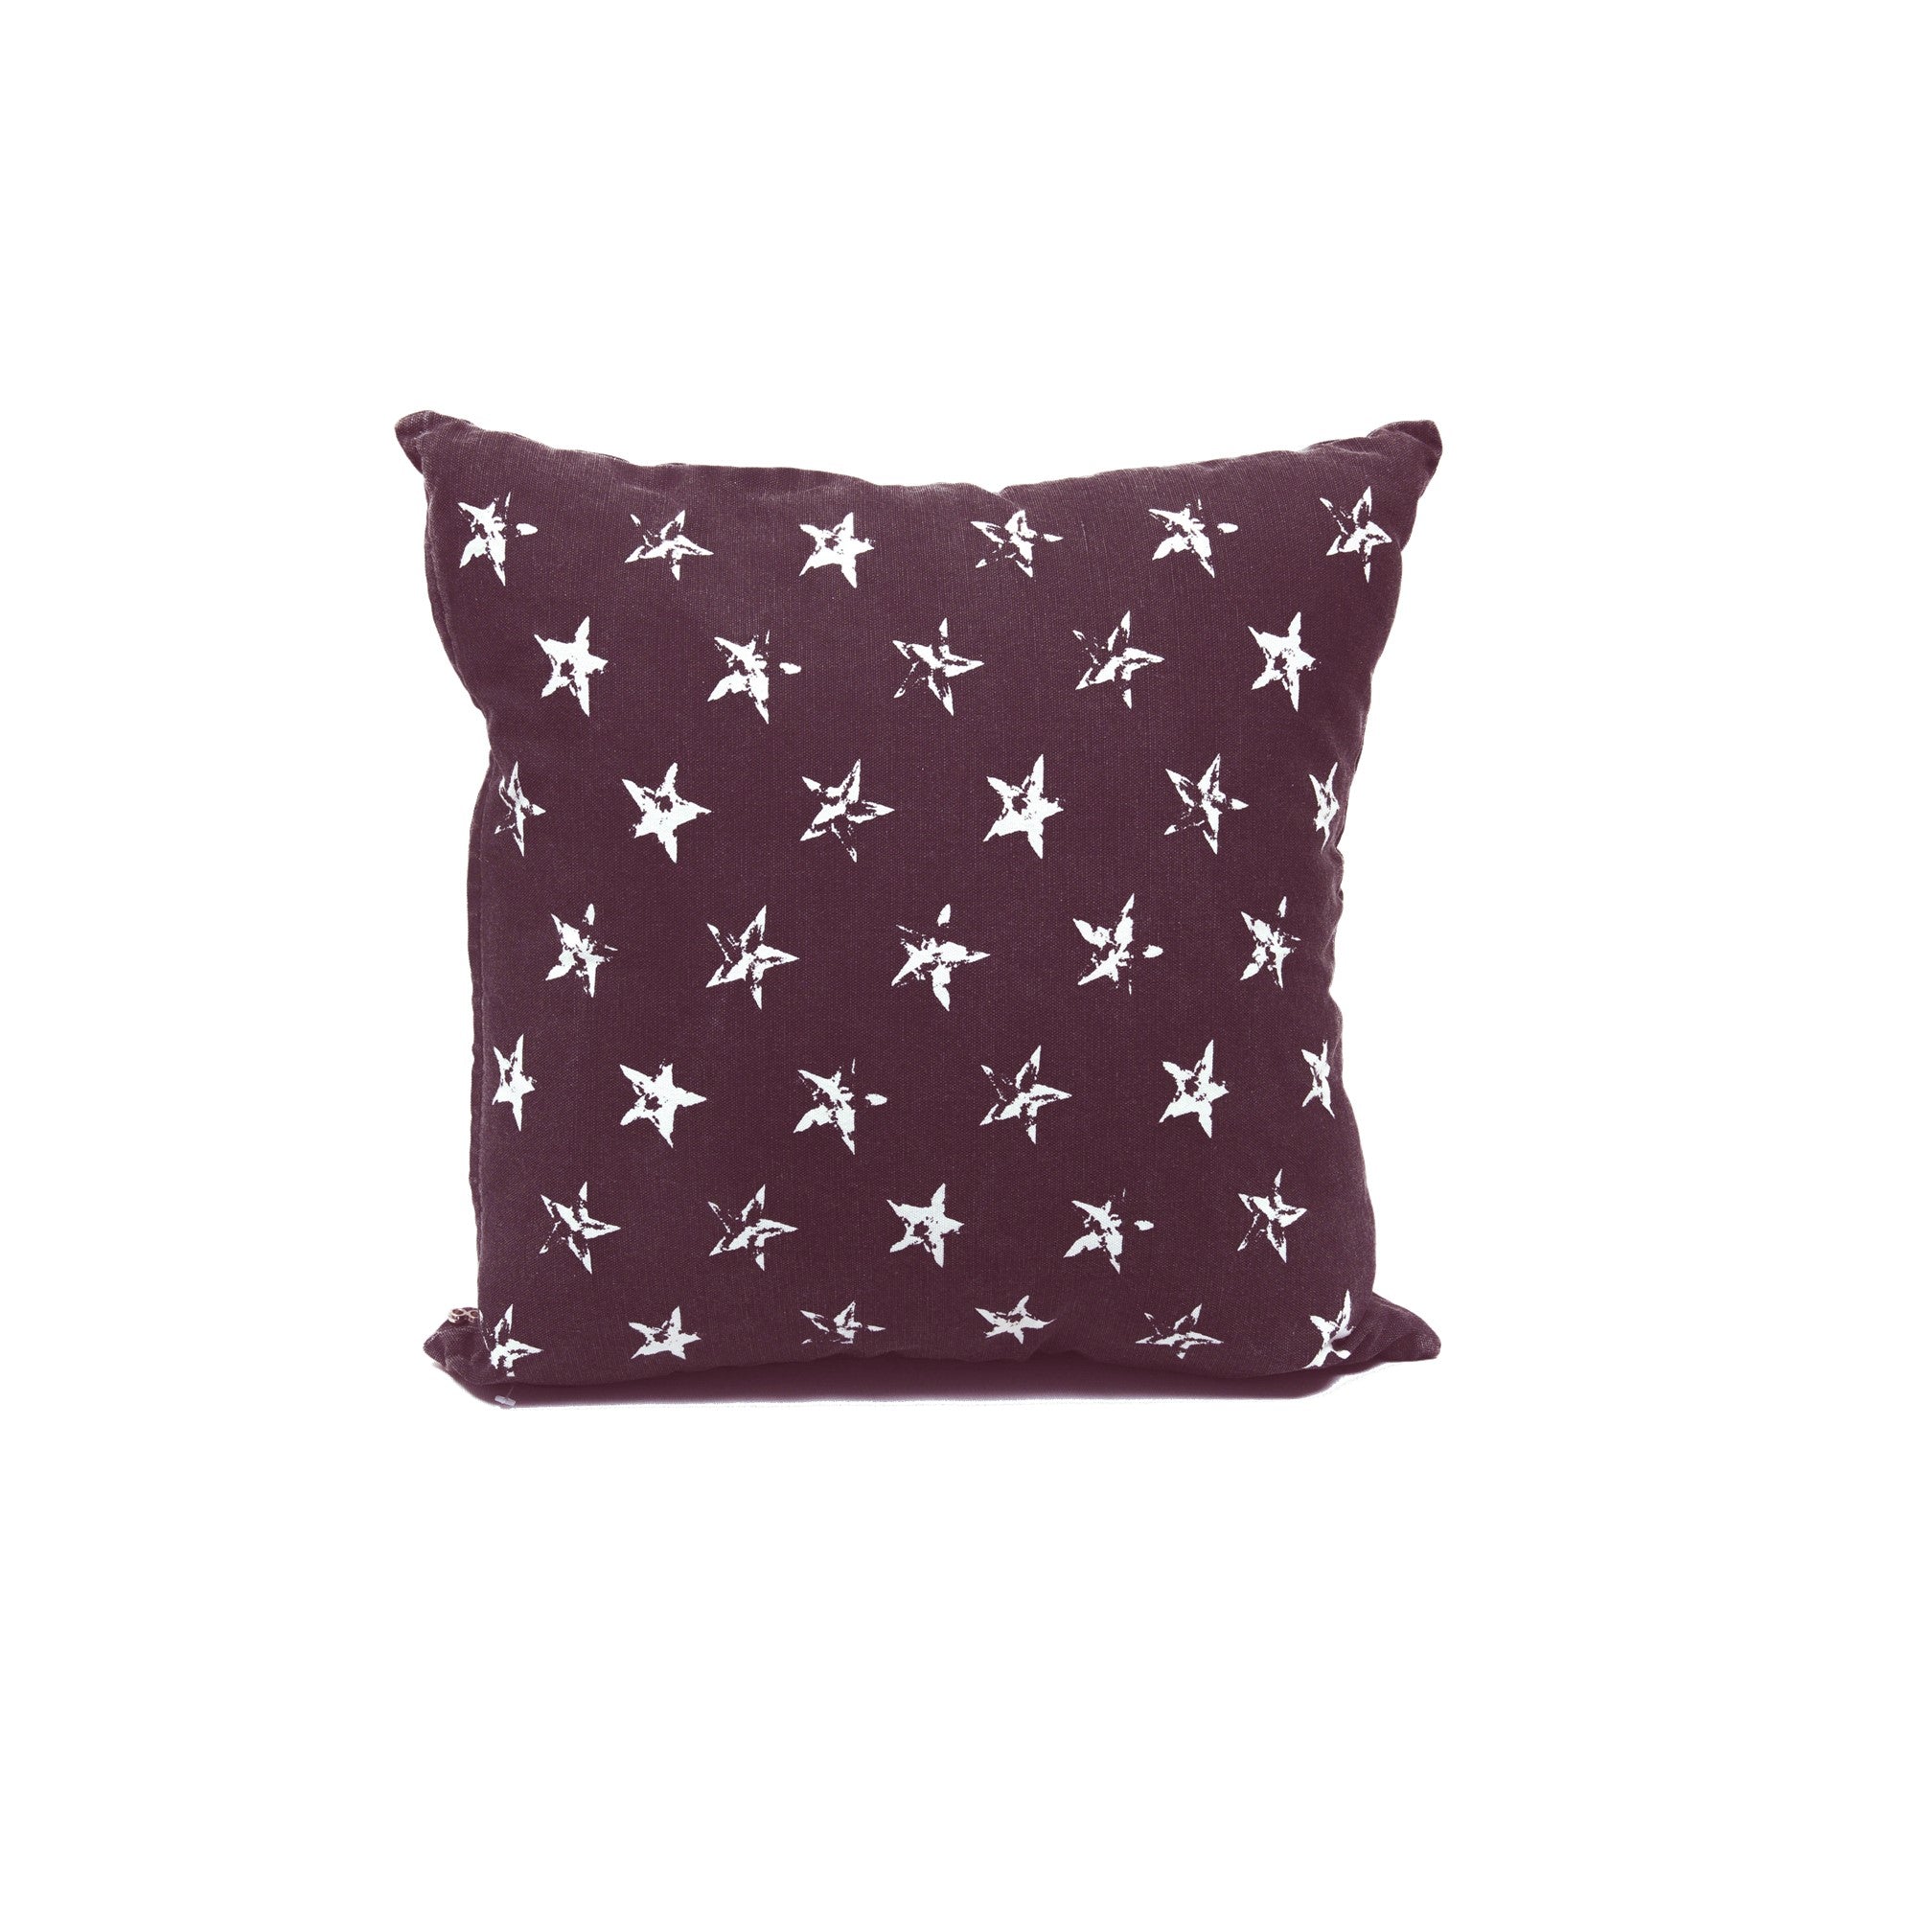 Distressed Star Print Cotton Cushion Cover in Black & White 1 BHK Interiors